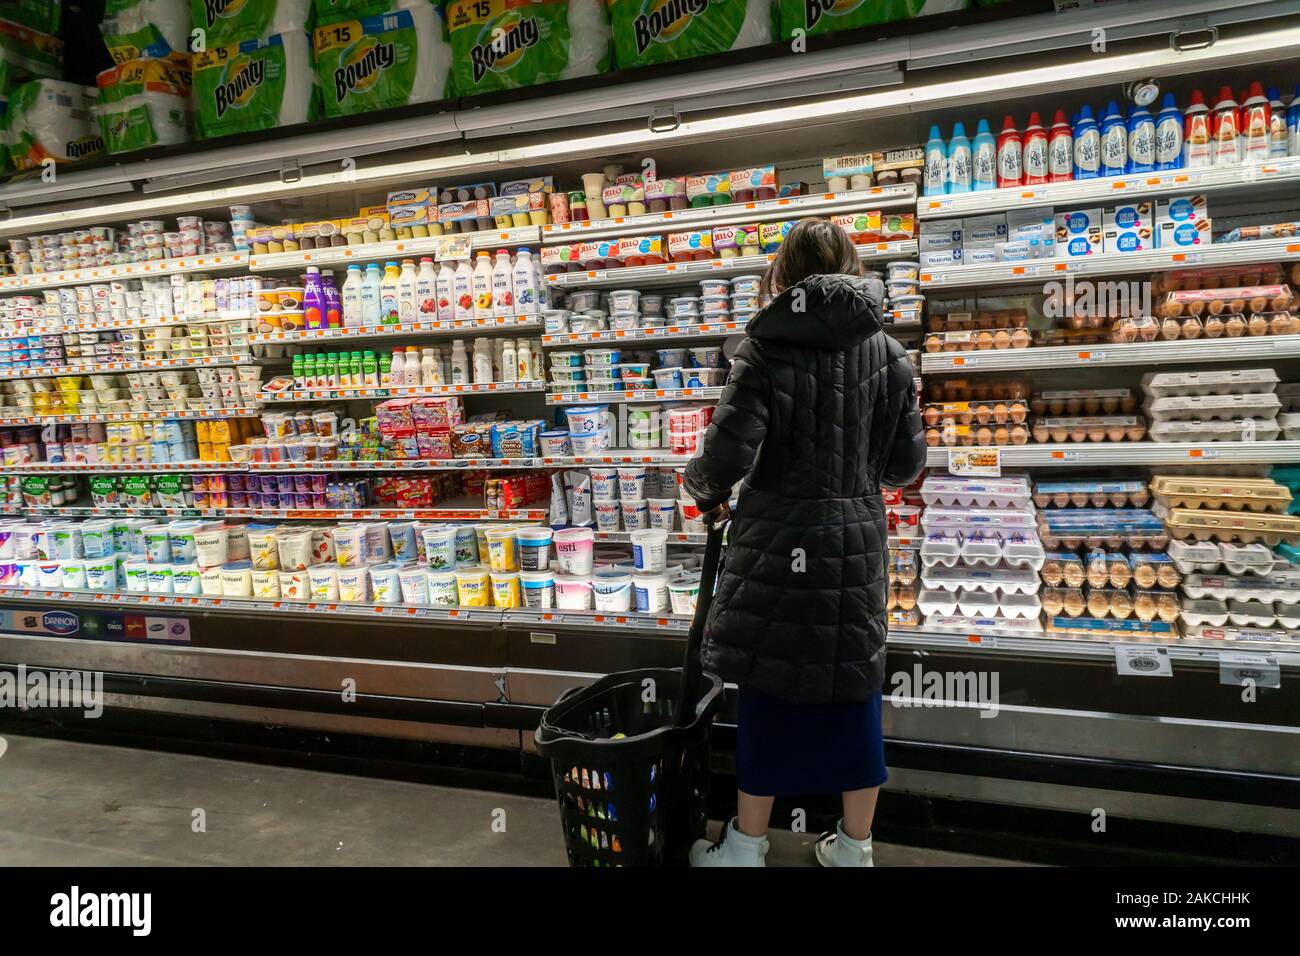 A woman shops dairy products in a supermarket in New York on Wednesday, January 1, 2020. (© Richard B. Levine) Stock Photo